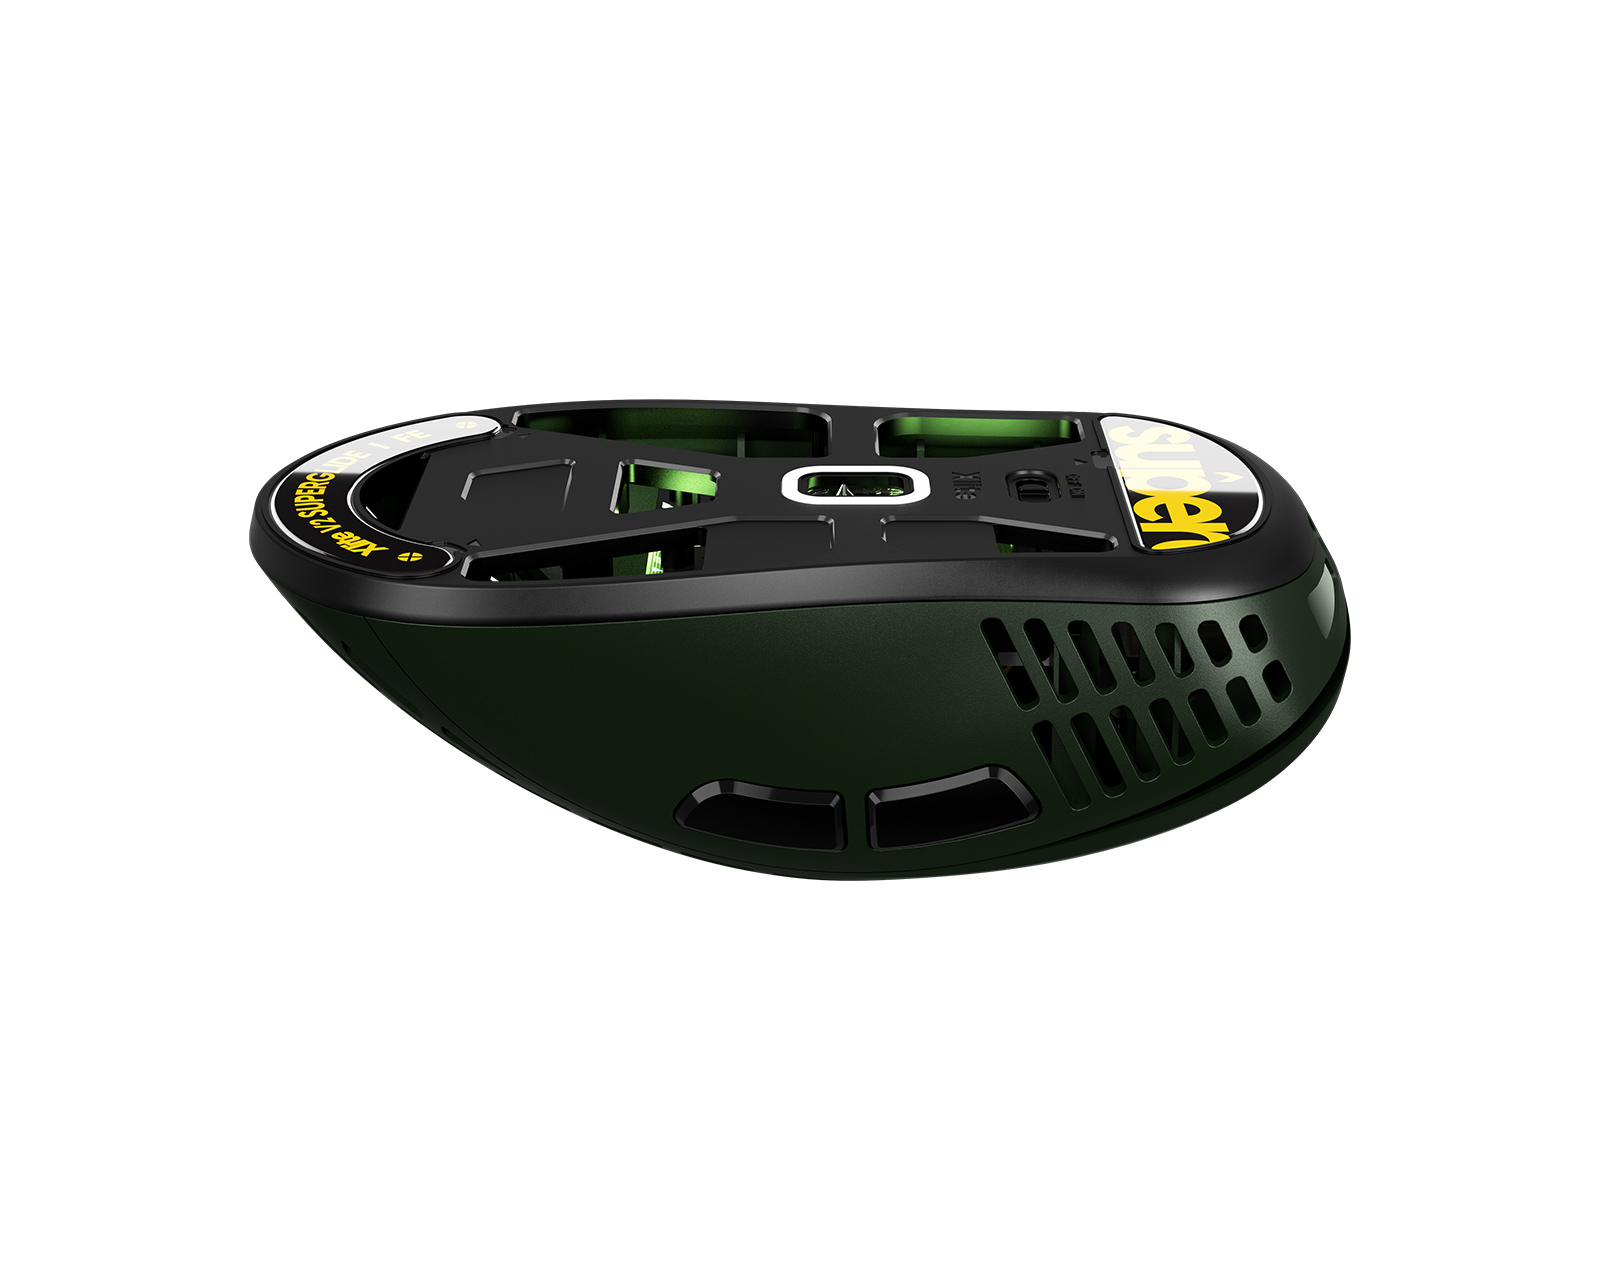 Pulsar Xlite Wireless v2 Mini Superglide Gaming Mouse - Green - Limited  Edition